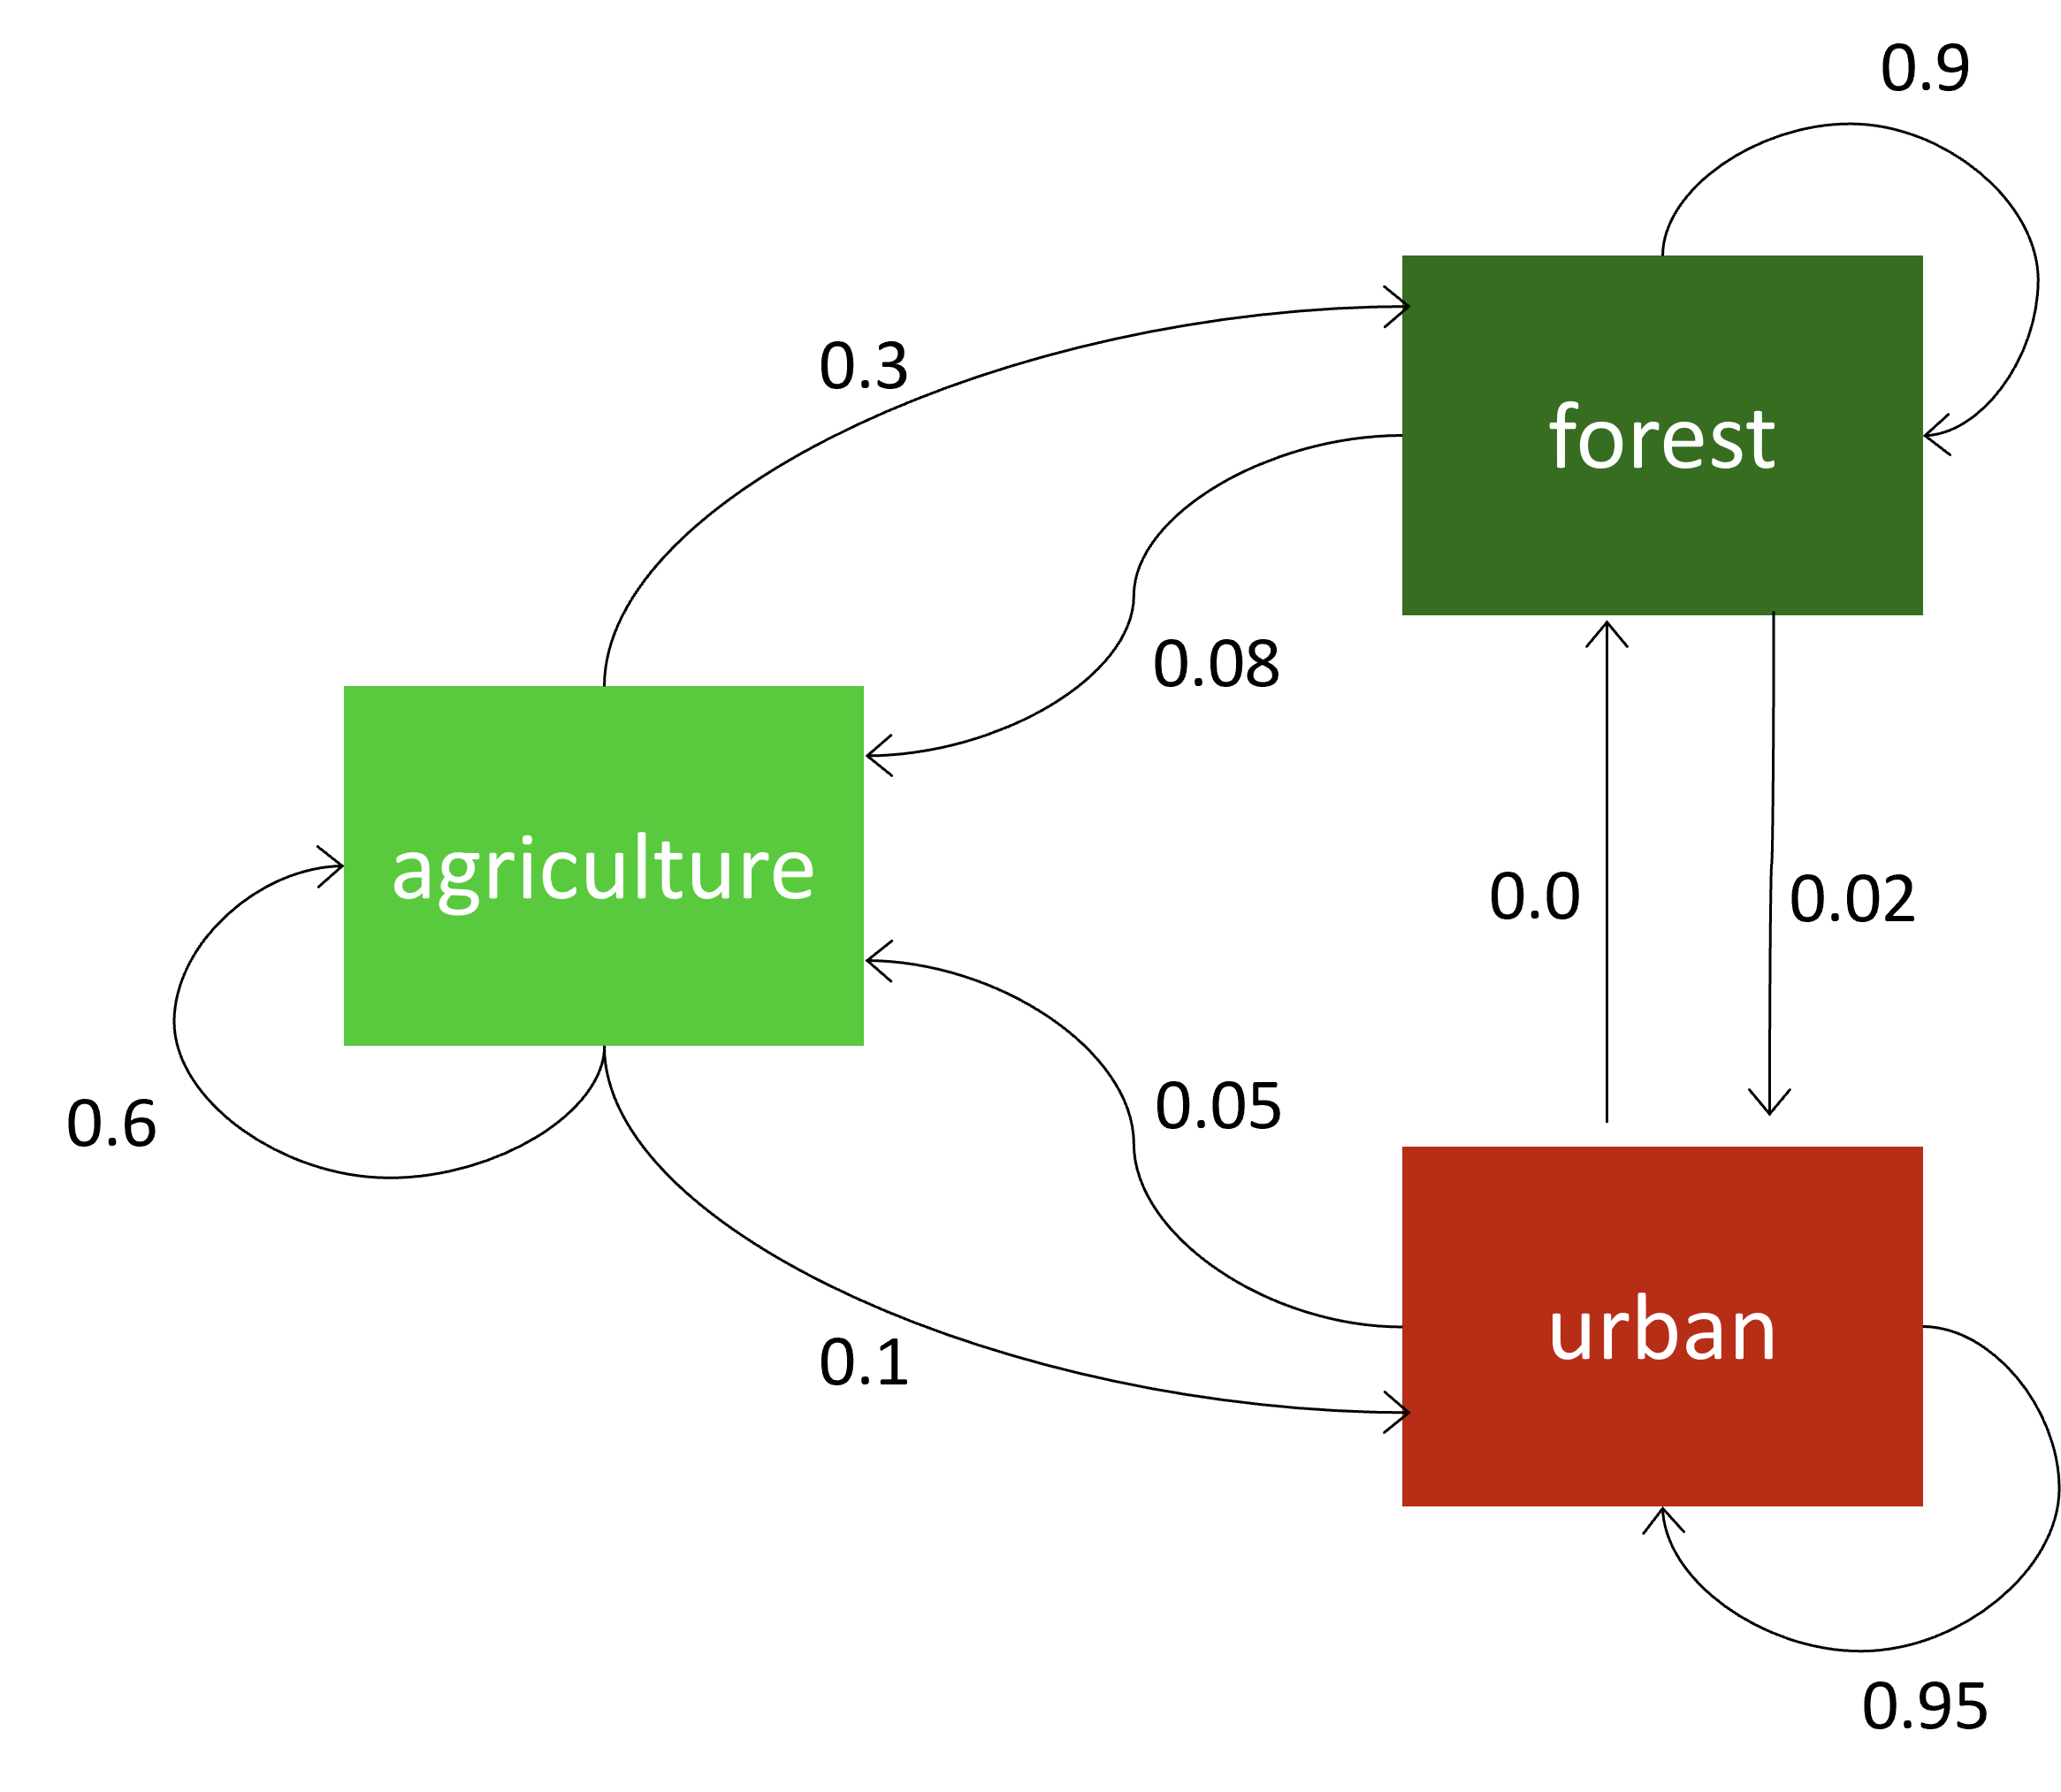 A markov chain model for land-use change defines the change probability for the next time step probabilistically from the current state.